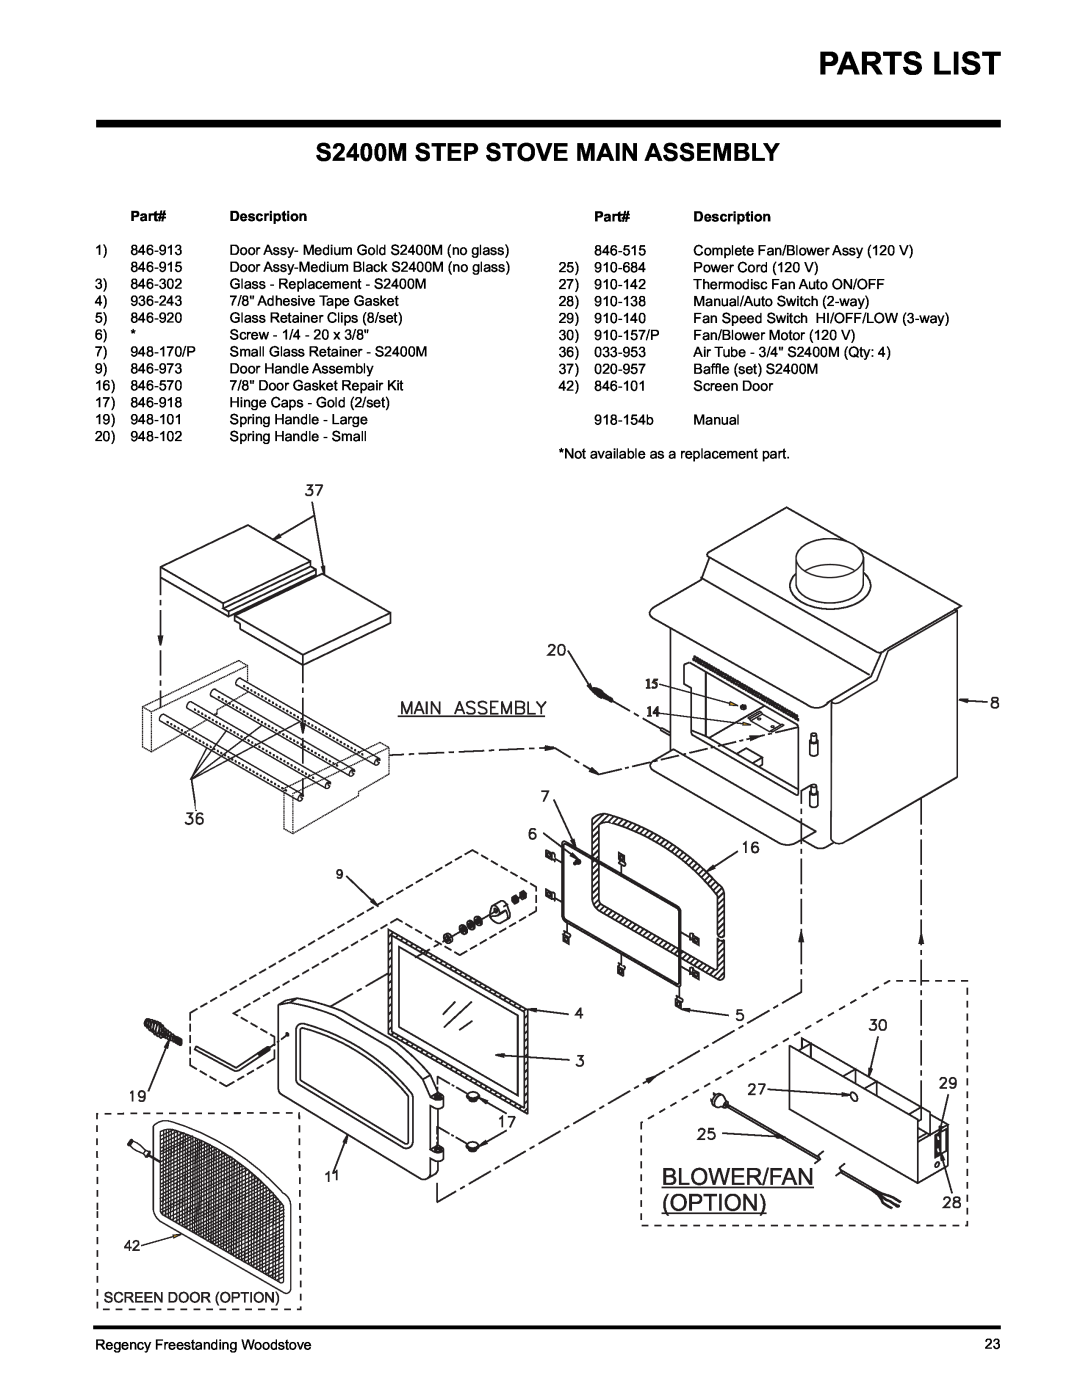 Regency Wraps F2400M installation manual Parts List, S2400M STEP STOVE MAIN ASSEMBLY 